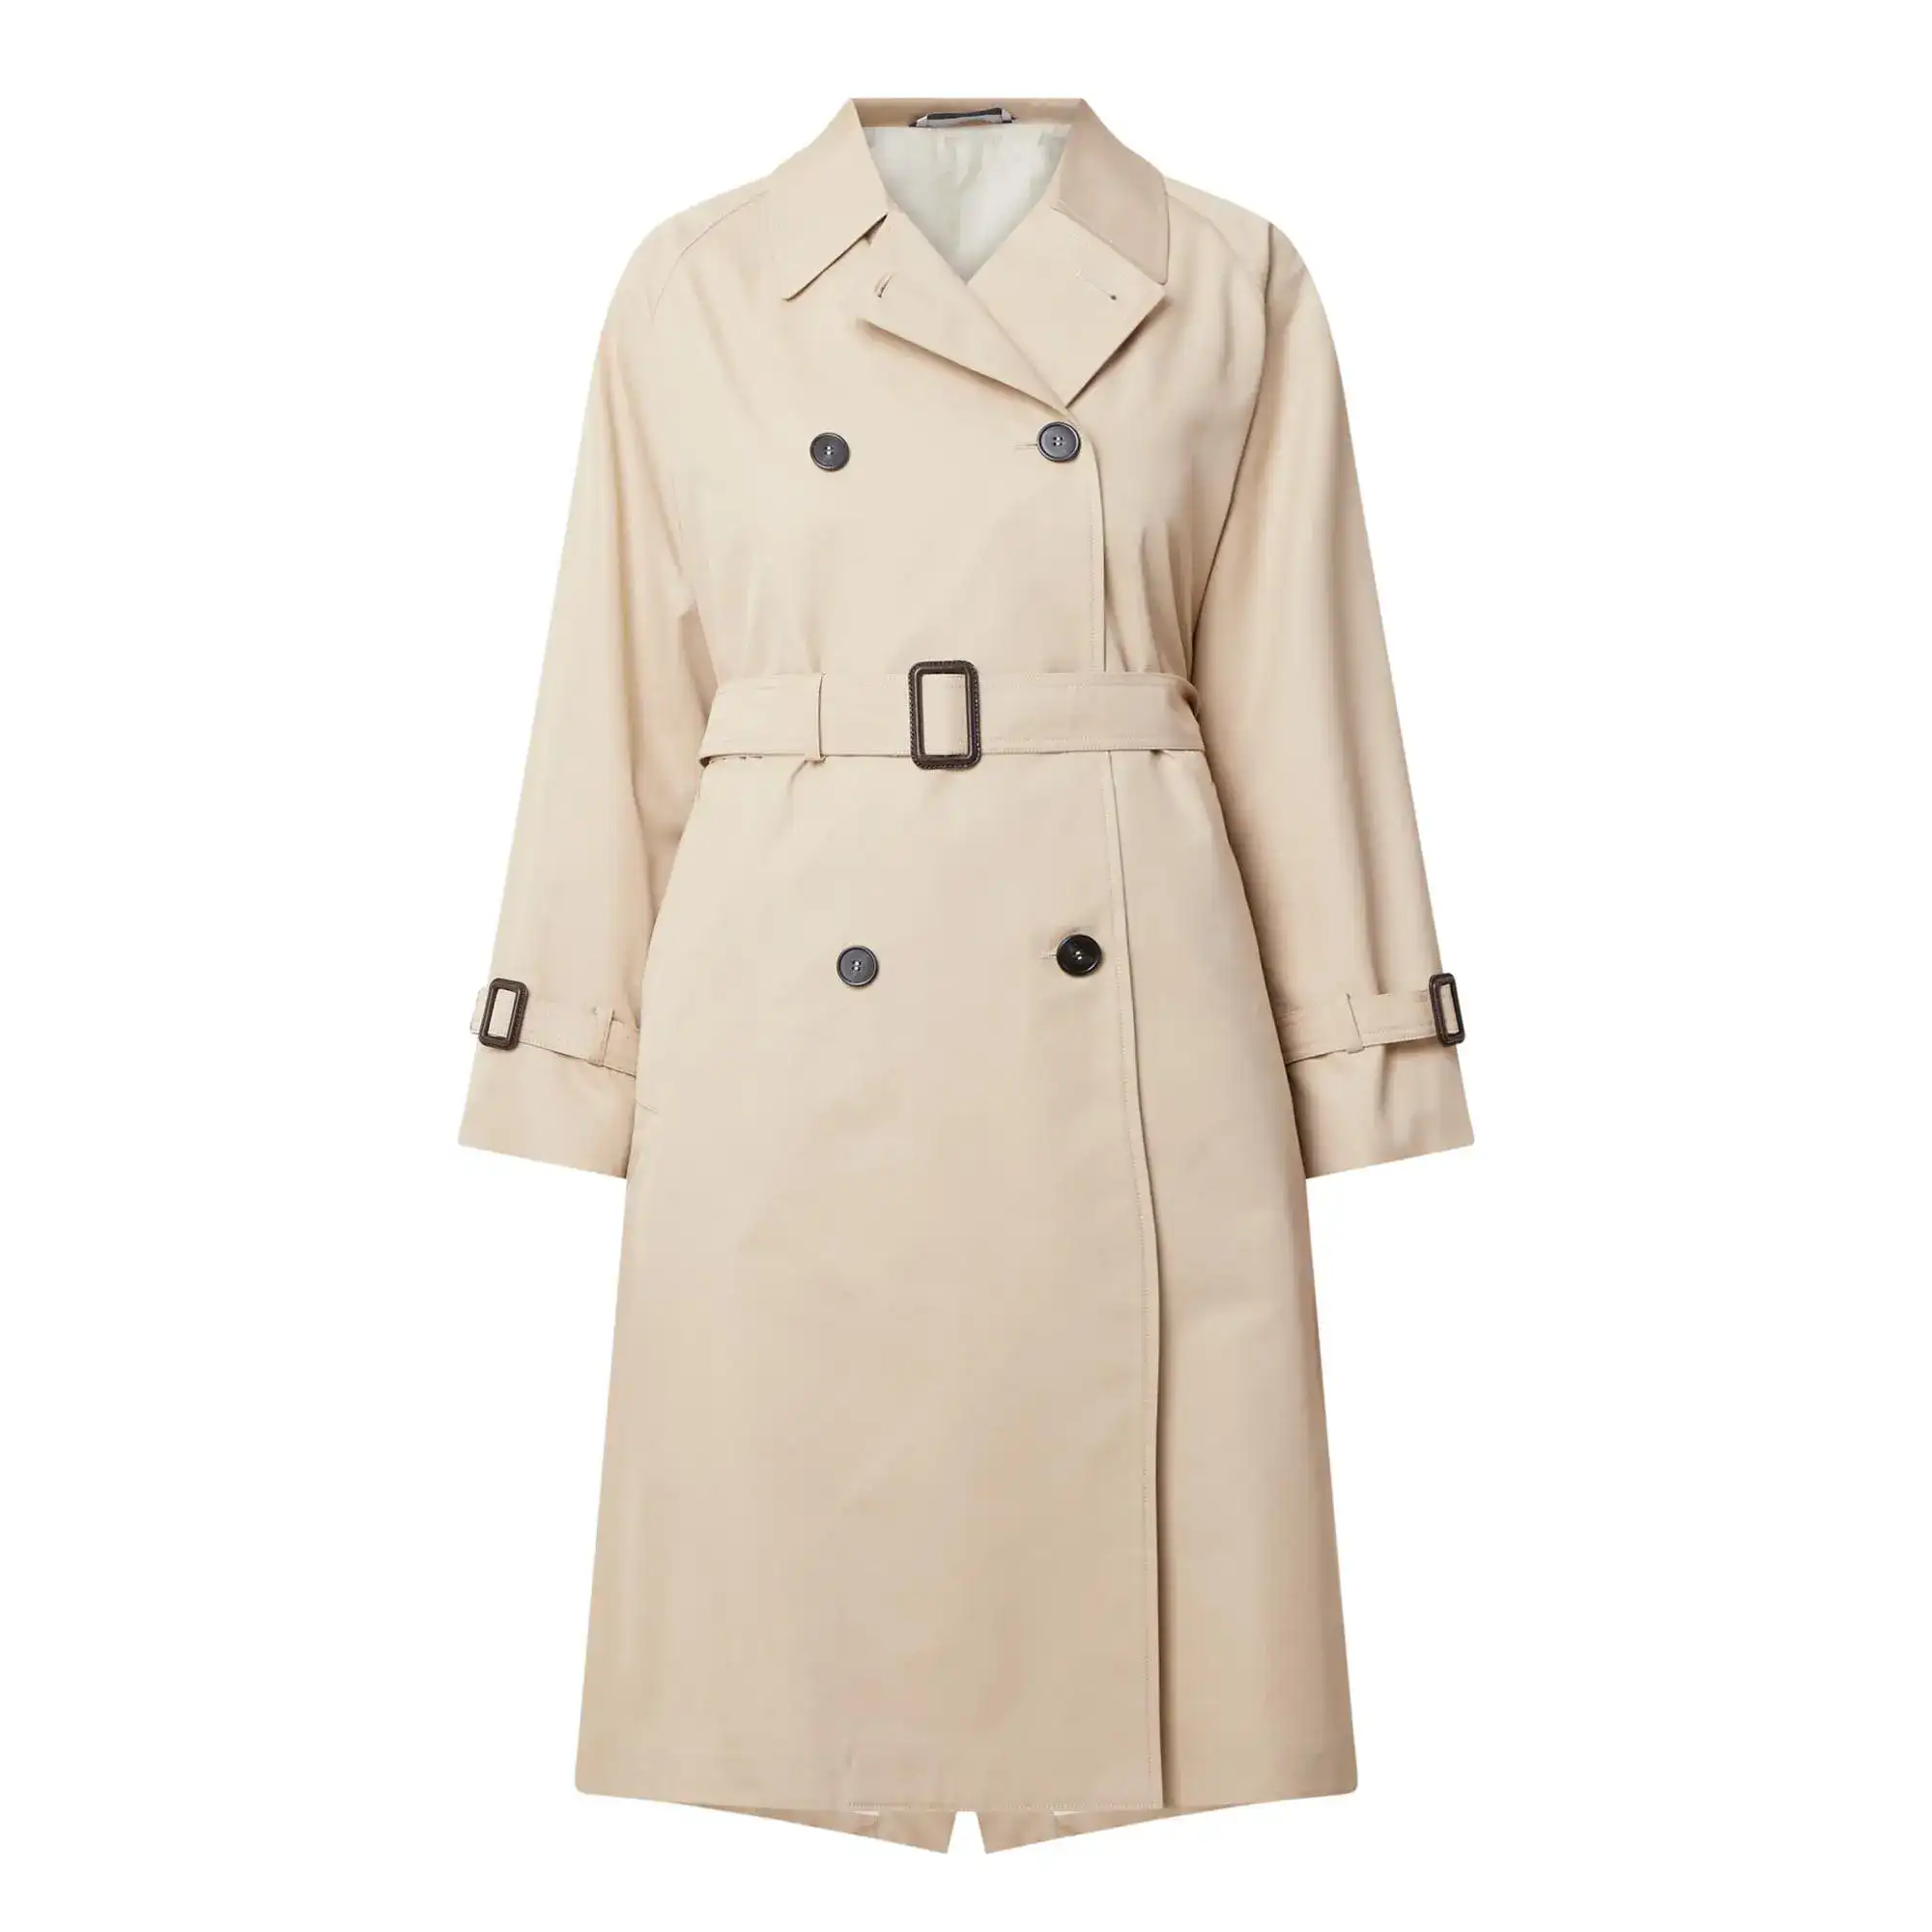 Shop for ♥ Canasta Double-breasted Trench Coat Weekend Max Mara Latest ...